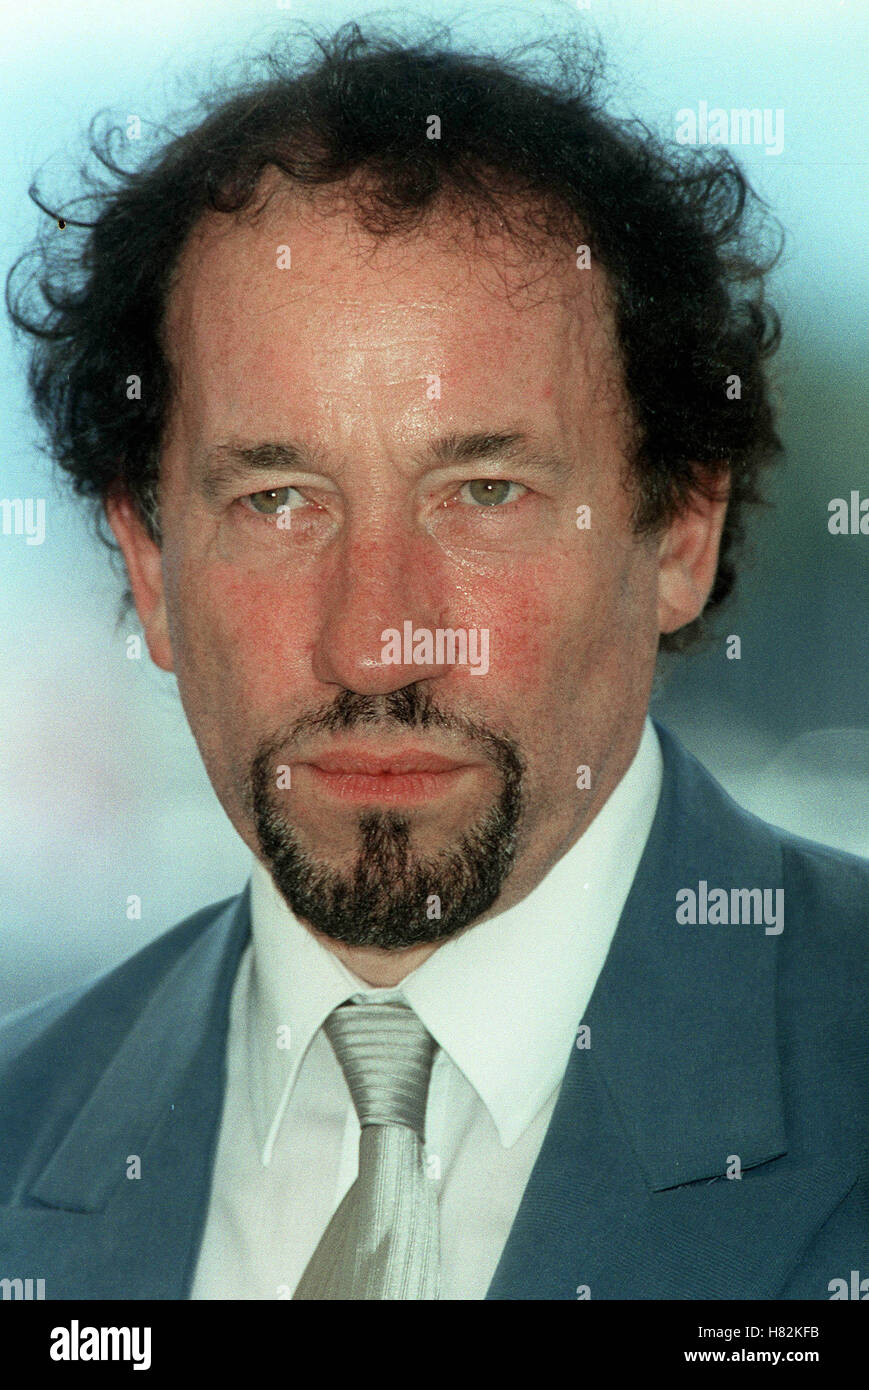 SIMON CALLOW CANNES FILM FESTIVAL CANNES FRANCE EUROPE 12 May 2001 Stock Photo